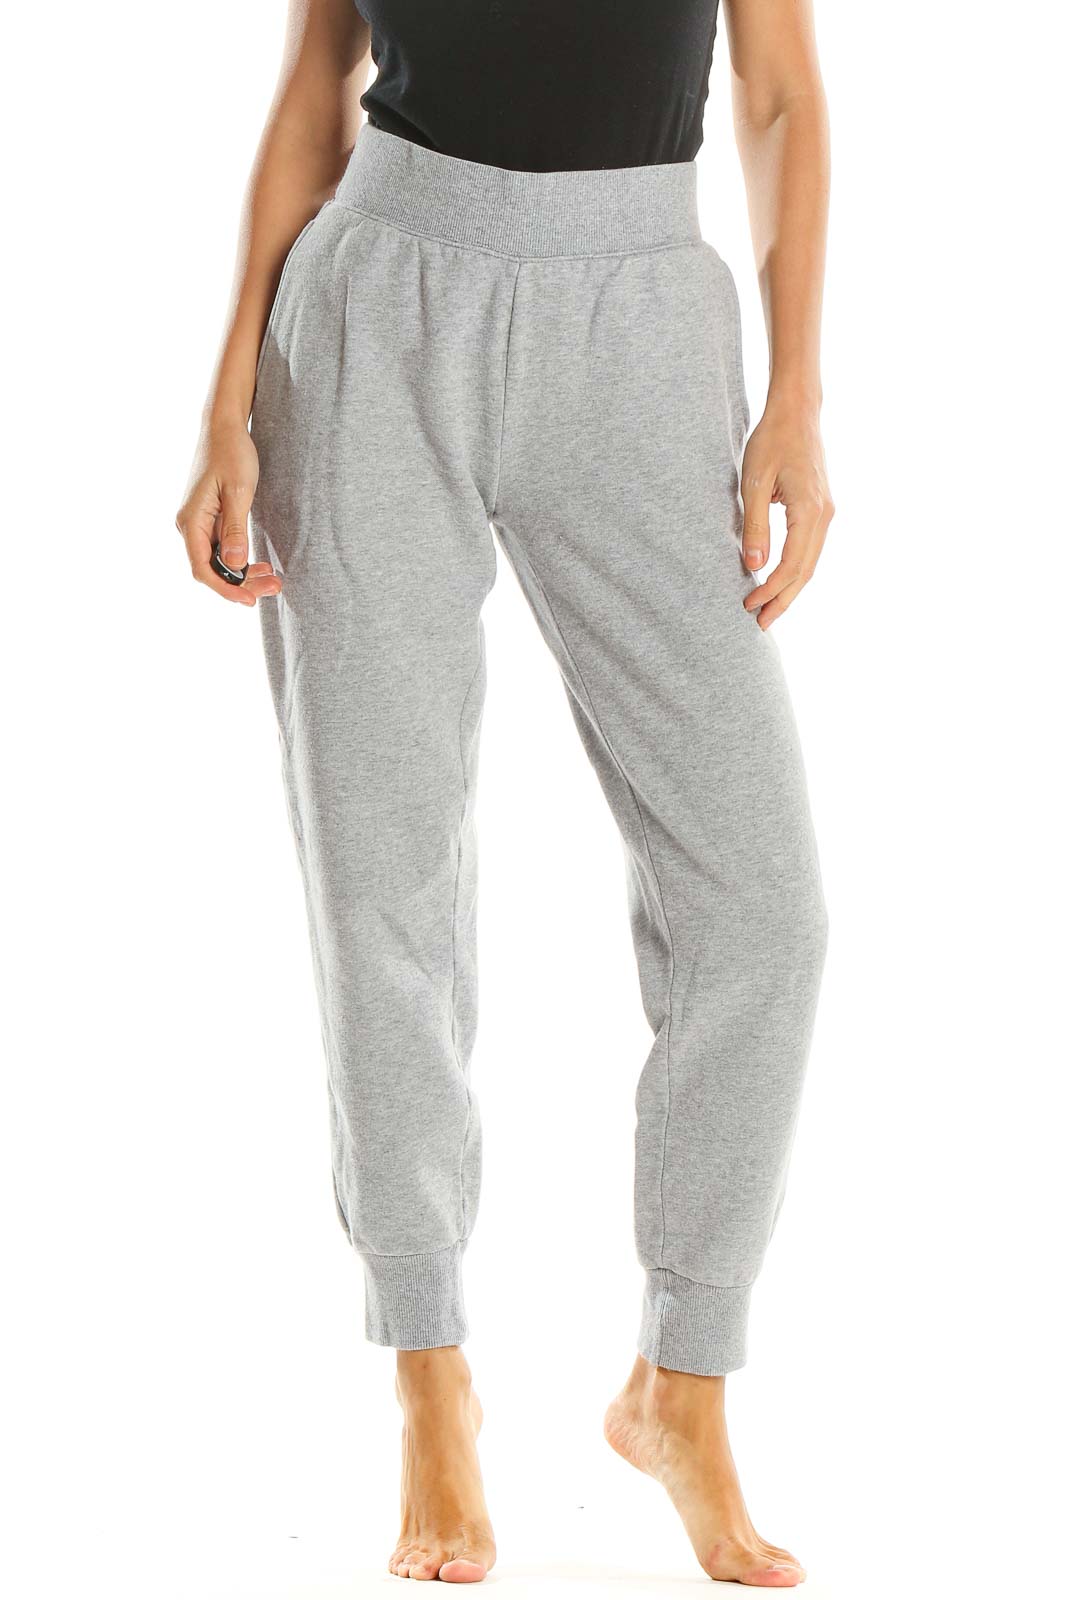 Gray Casual Sweatpants Front